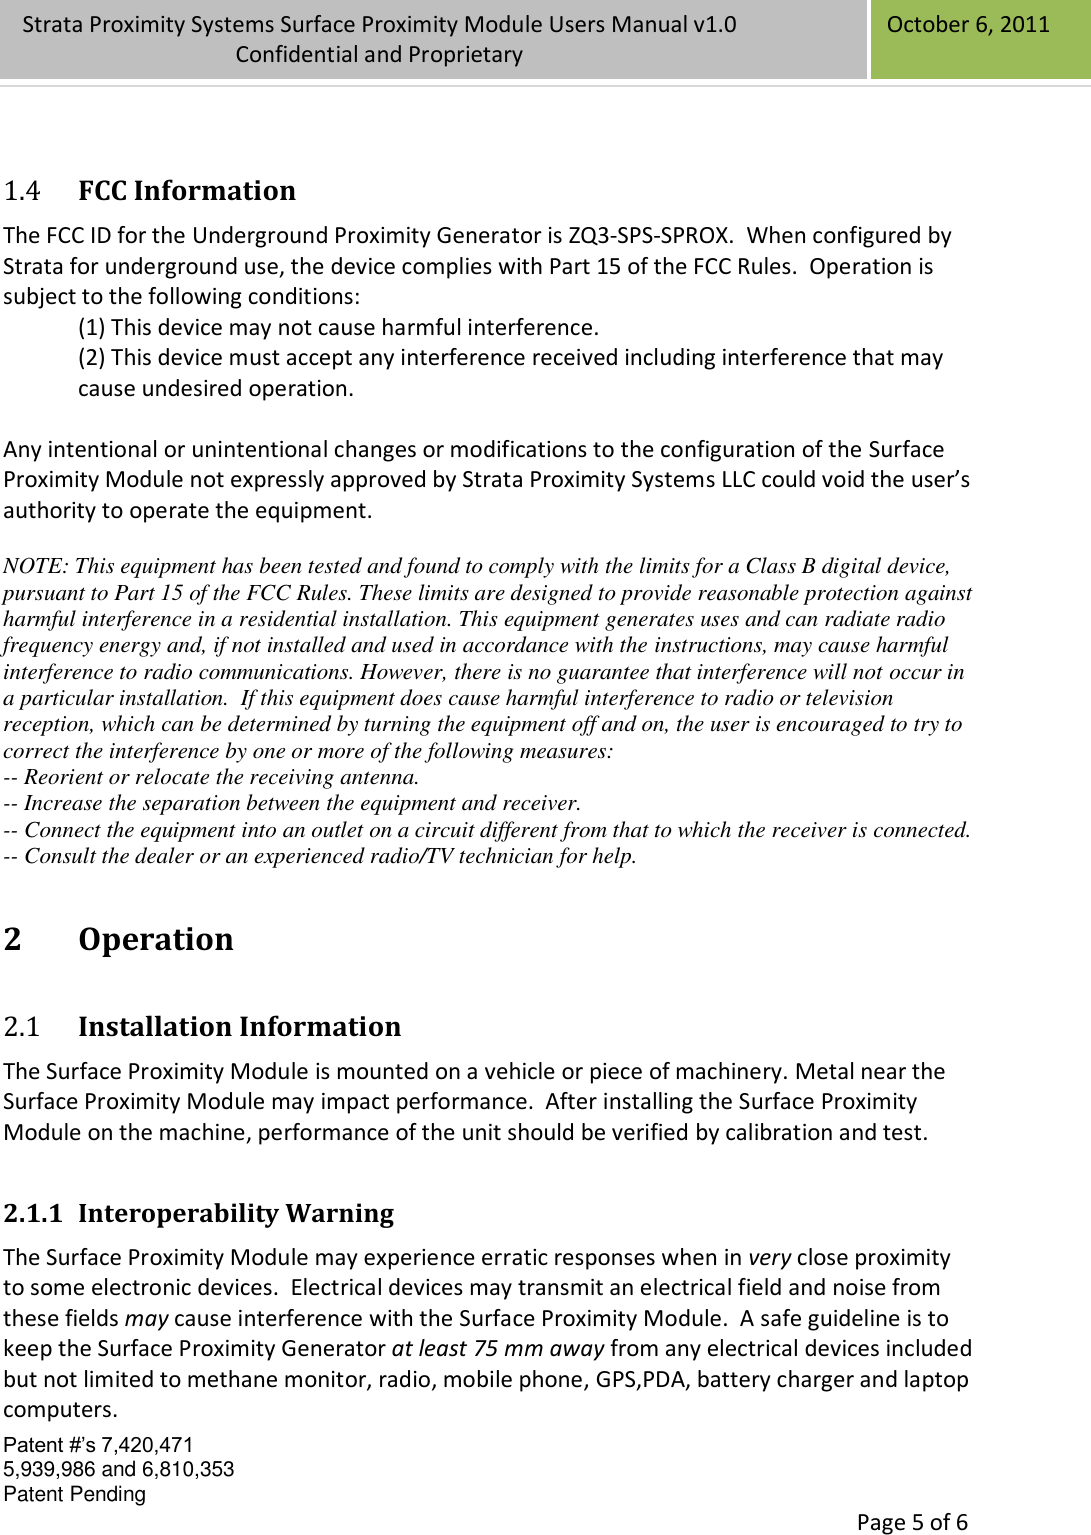 Confidential Patent #’s 7,420,471 5,939,986 and 6,810,353 Patent Pending   Page 5 of 6 Strata Proximity Systems Surface Proximity Module Users Manual v1.0 Confidential and Proprietary   October 6, 2011  1.4 FCC Information The FCC ID for the Underground Proximity Generator is ZQ3-SPS-SPROX.  When configured by Strata for underground use, the device complies with Part 15 of the FCC Rules.  Operation is subject to the following conditions: (1) This device may not cause harmful interference. (2) This device must accept any interference received including interference that may cause undesired operation.  Any intentional or unintentional changes or modifications to the configuration of the Surface Proximity Module not expressly approved by Strata Proximity Systems LLC could void the user’s authority to operate the equipment.  NOTE: This equipment has been tested and found to comply with the limits for a Class B digital device, pursuant to Part 15 of the FCC Rules. These limits are designed to provide reasonable protection against harmful interference in a residential installation. This equipment generates uses and can radiate radio frequency energy and, if not installed and used in accordance with the instructions, may cause harmful interference to radio communications. However, there is no guarantee that interference will not occur in a particular installation.  If this equipment does cause harmful interference to radio or television reception, which can be determined by turning the equipment off and on, the user is encouraged to try to correct the interference by one or more of the following measures: -- Reorient or relocate the receiving antenna. -- Increase the separation between the equipment and receiver. -- Connect the equipment into an outlet on a circuit different from that to which the receiver is connected. -- Consult the dealer or an experienced radio/TV technician for help. 2 Operation 2.1 Installation Information The Surface Proximity Module is mounted on a vehicle or piece of machinery. Metal near the Surface Proximity Module may impact performance.  After installing the Surface Proximity Module on the machine, performance of the unit should be verified by calibration and test.   2.1.1 Interoperability Warning The Surface Proximity Module may experience erratic responses when in very close proximity to some electronic devices.  Electrical devices may transmit an electrical field and noise from these fields may cause interference with the Surface Proximity Module.  A safe guideline is to keep the Surface Proximity Generator at least 75 mm away from any electrical devices included but not limited to methane monitor, radio, mobile phone, GPS,PDA, battery charger and laptop computers. 